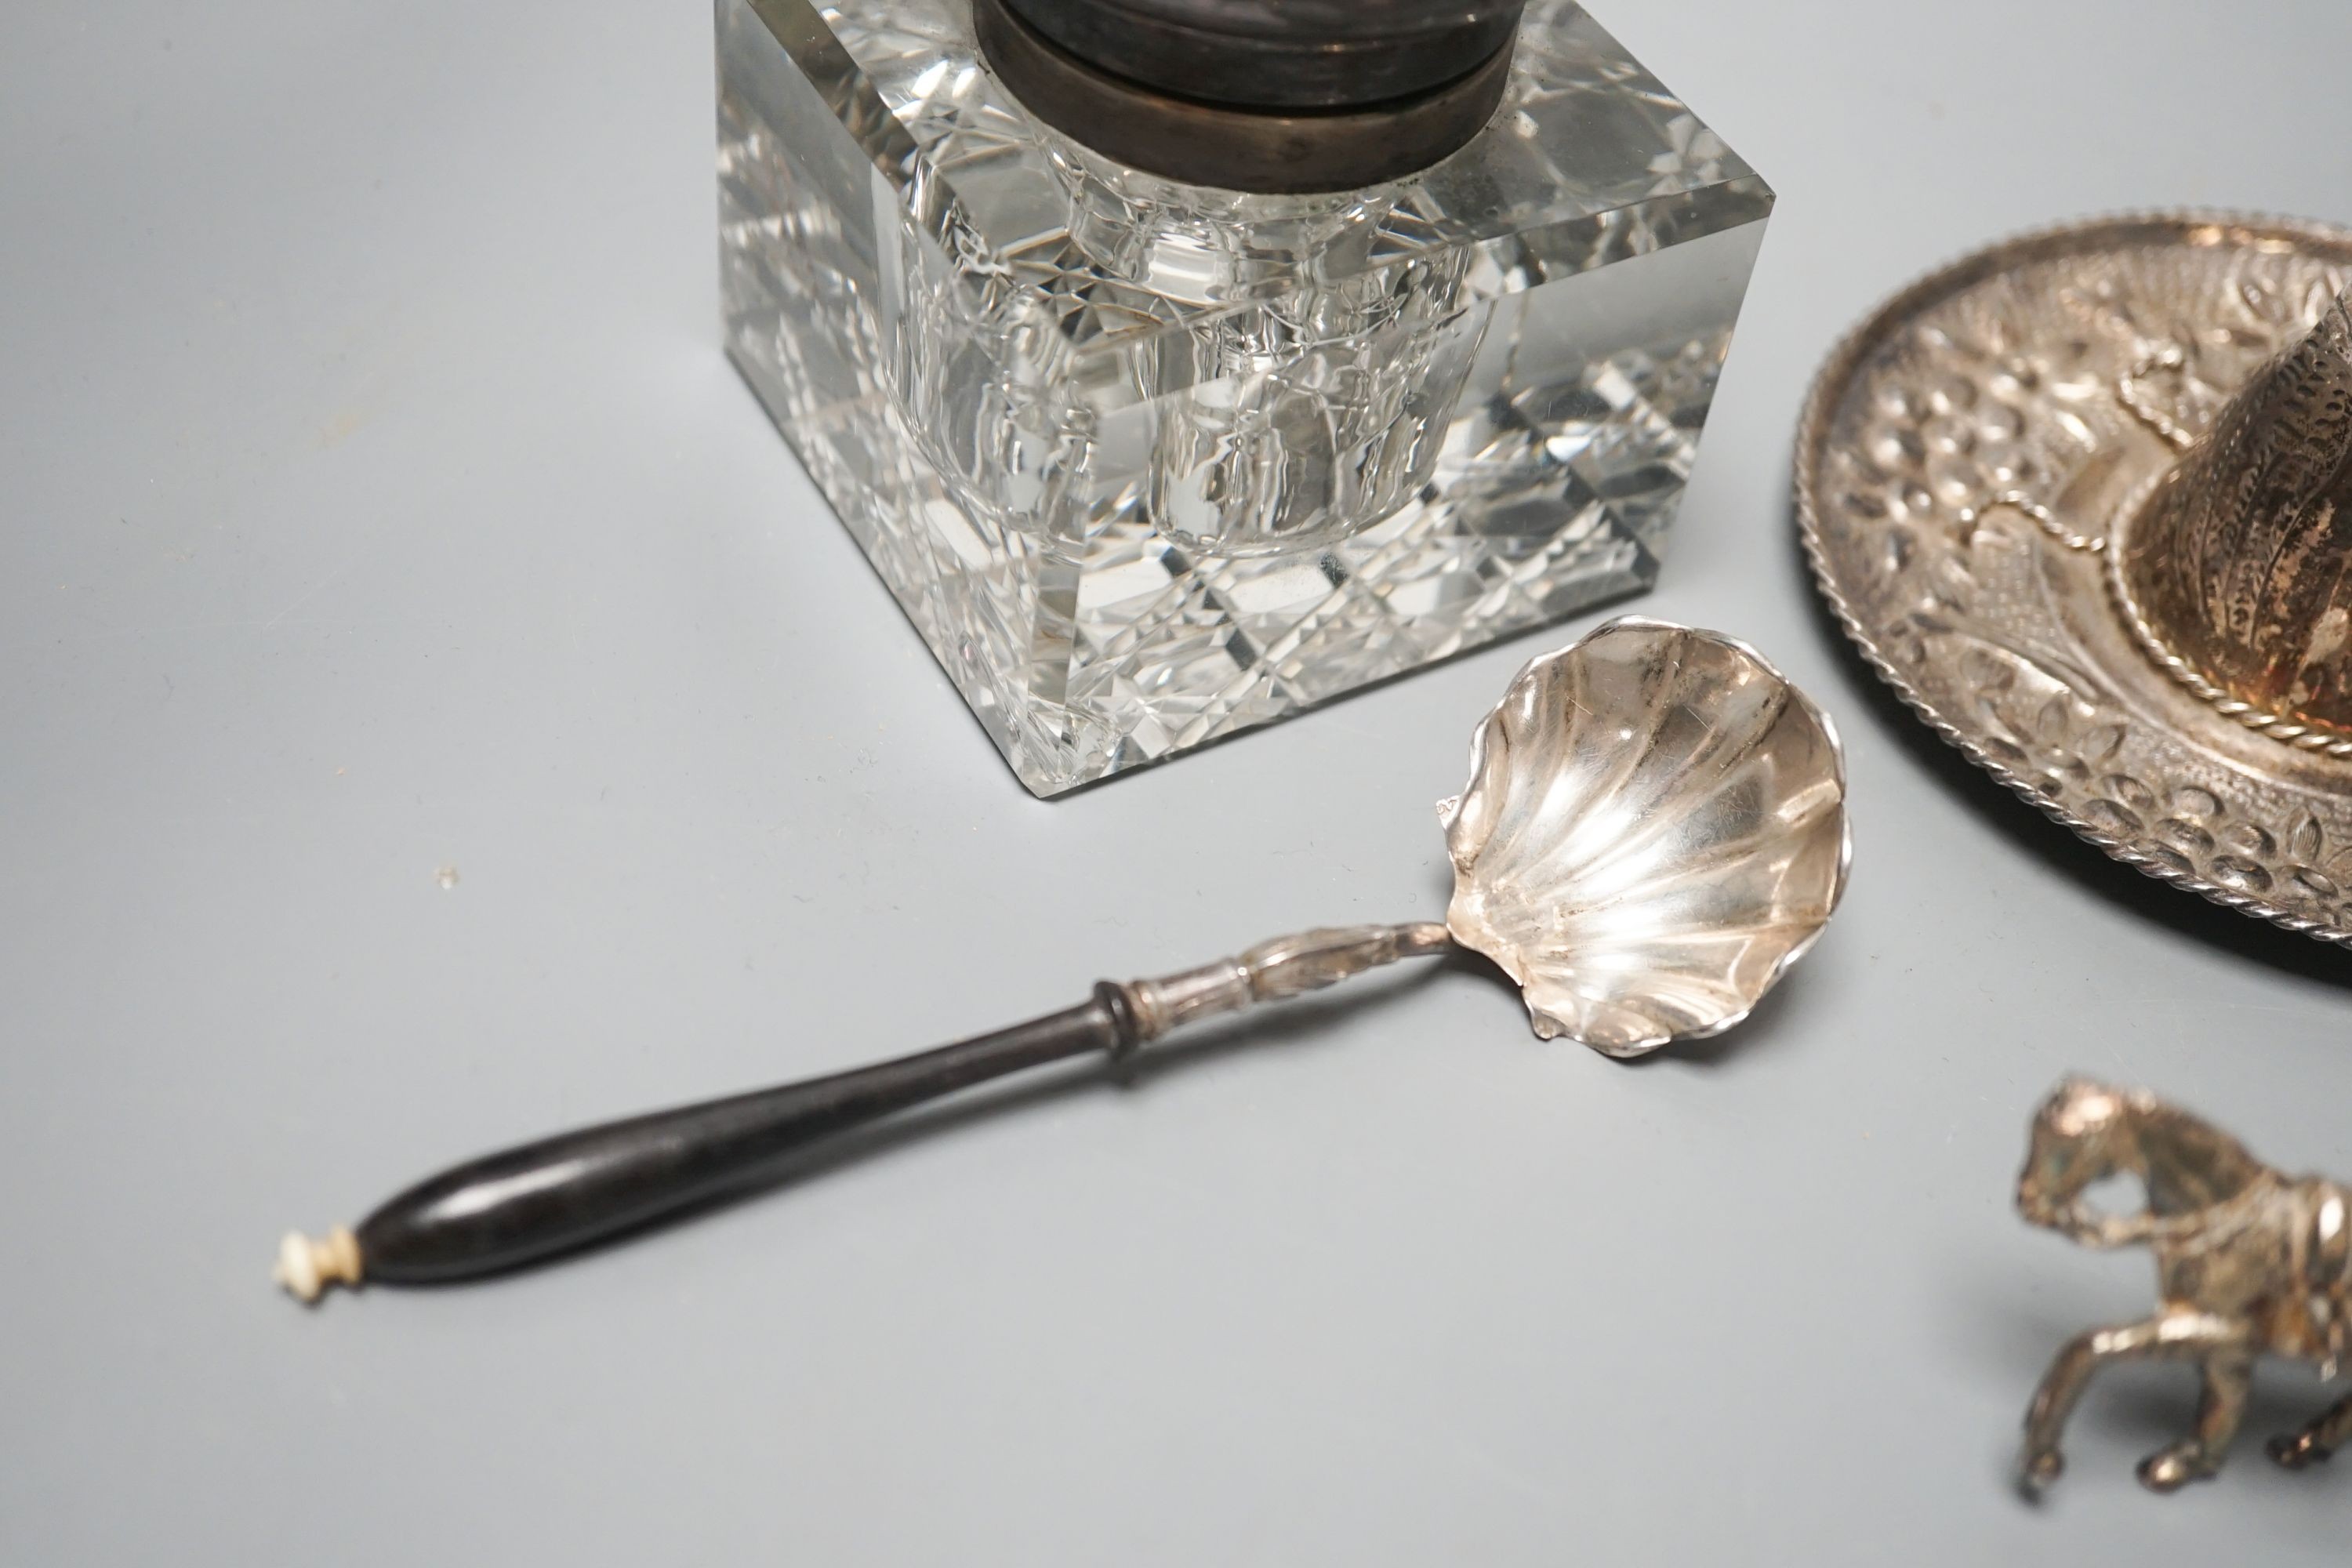 A silver mounted glass inkwell, A Mexican white metal miniature sombrero, a white metal caddy spoon and a filigree horse and carriage.